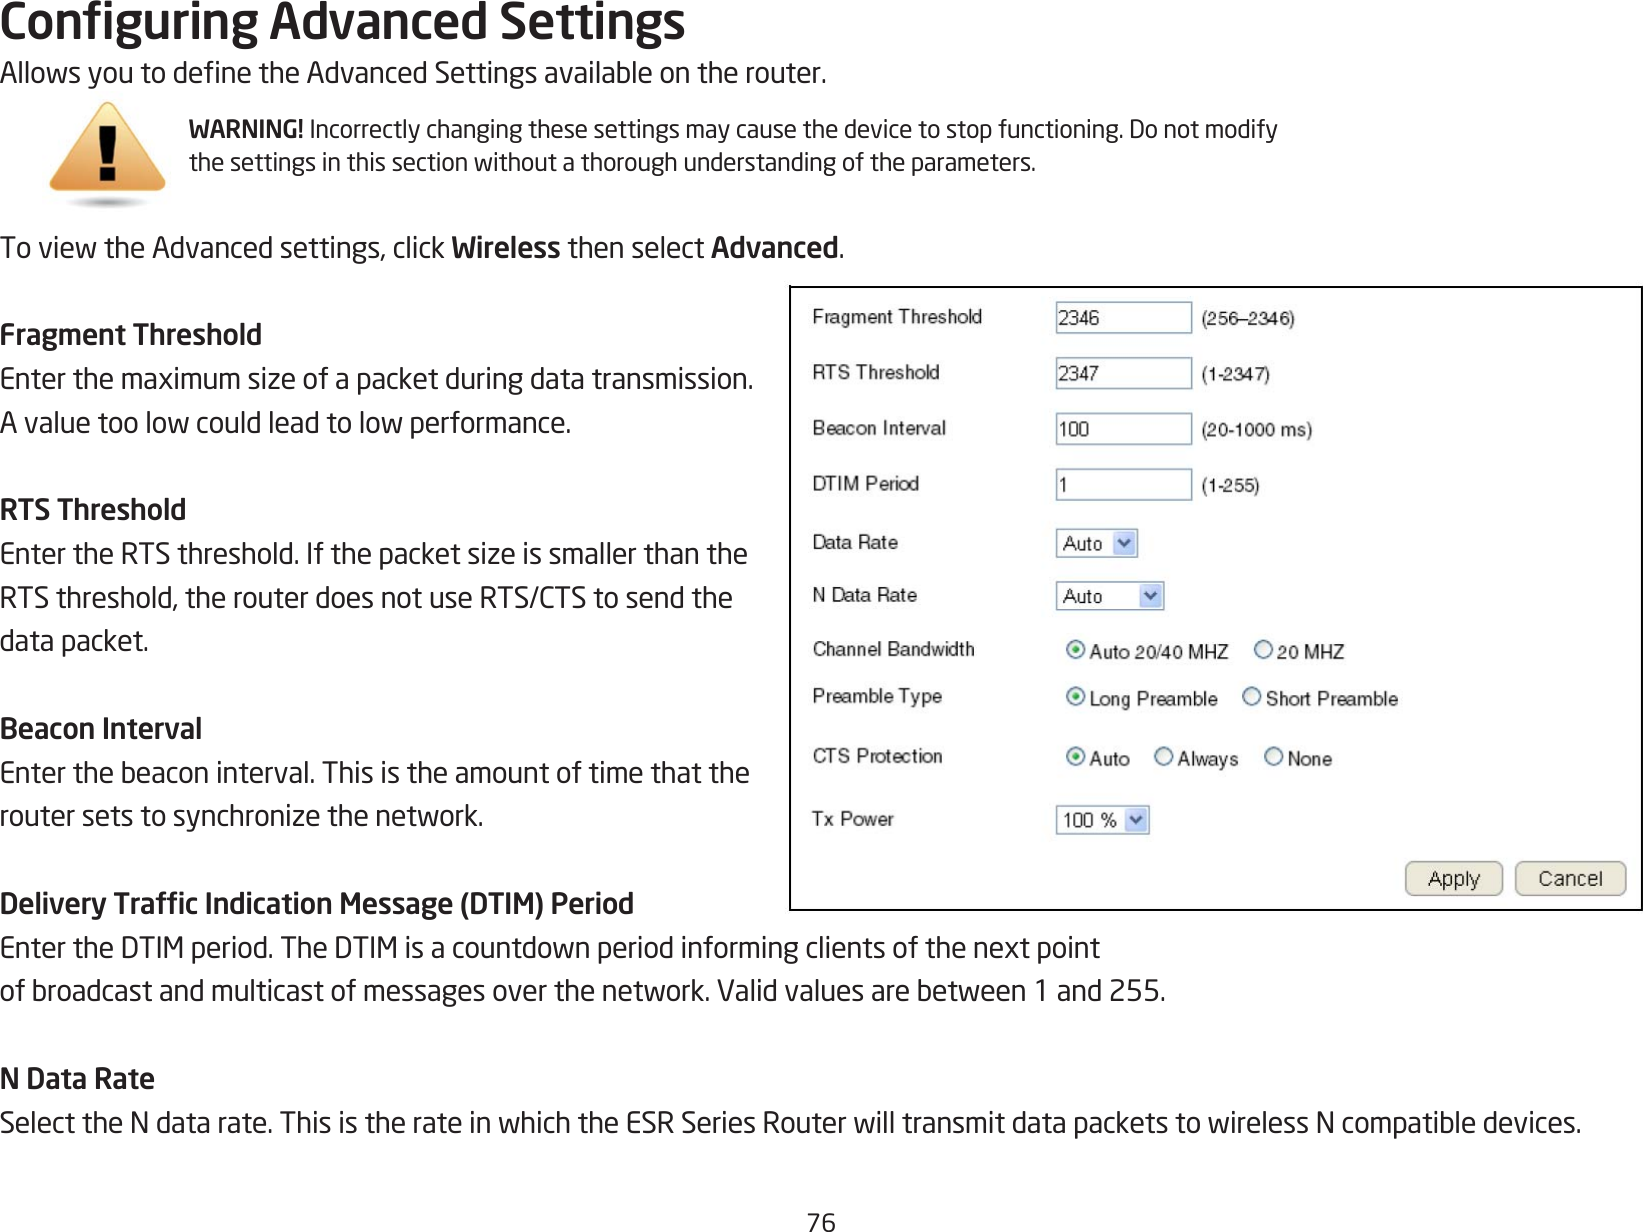 76Conguring Advanced SettingsAllowsyoutodenetheAdvancedSettingsavailableontherouter.ToviewtheAdvancedsettings,clickWireless then select Advanced.Fragment ThresholdEnterthemaximumsizeofapacketduringdatatransmission.Avaluetoolowcouldleadtolowperformance.RTS ThresholdEntertheRTSthreshold.IfthepacketsizeissmallerthantheRTSthreshold,therouterdoesnotuseRTS/CTStosendthedata packet.Beacon IntervalEnterthebeaconinterval.Thisistheamountoftimethattheroutersetstosynchronizethenetwork.Delivery Trafc Indication Message (DTIM) PeriodEntertheDTIMperiod.TheDTIMisacountdownperiodinformingclientsofthenextpointofbroadcastandmulticastofmessagesoverthenetwork.Validvaluesarebetween1and255.N Data RateSelecttheNdatarate.ThisistherateinwhichtheESRSeriesRouterwilltransmitdatapacketstowirelessNcompatibledevices.WARNING!Incorrectlychangingthesesettingsmaycausethedevicetostopfunctioning.Donotmodifythesettingsinthissectionwithoutathoroughunderstandingoftheparameters.